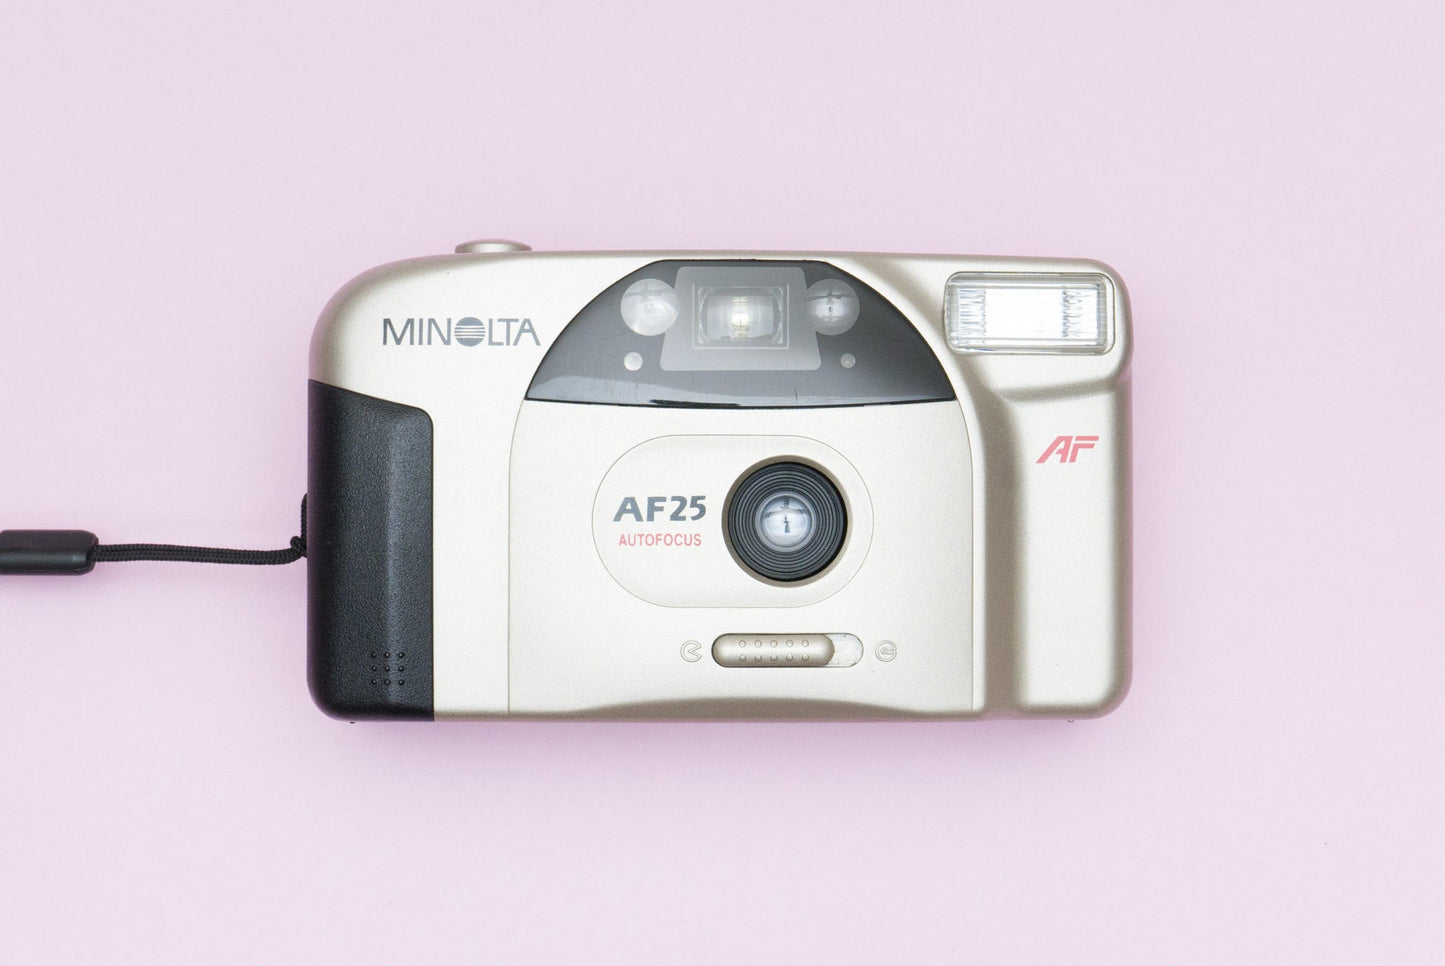 Minolta AF25 Compact 35mm Point and Shoot Film Camera